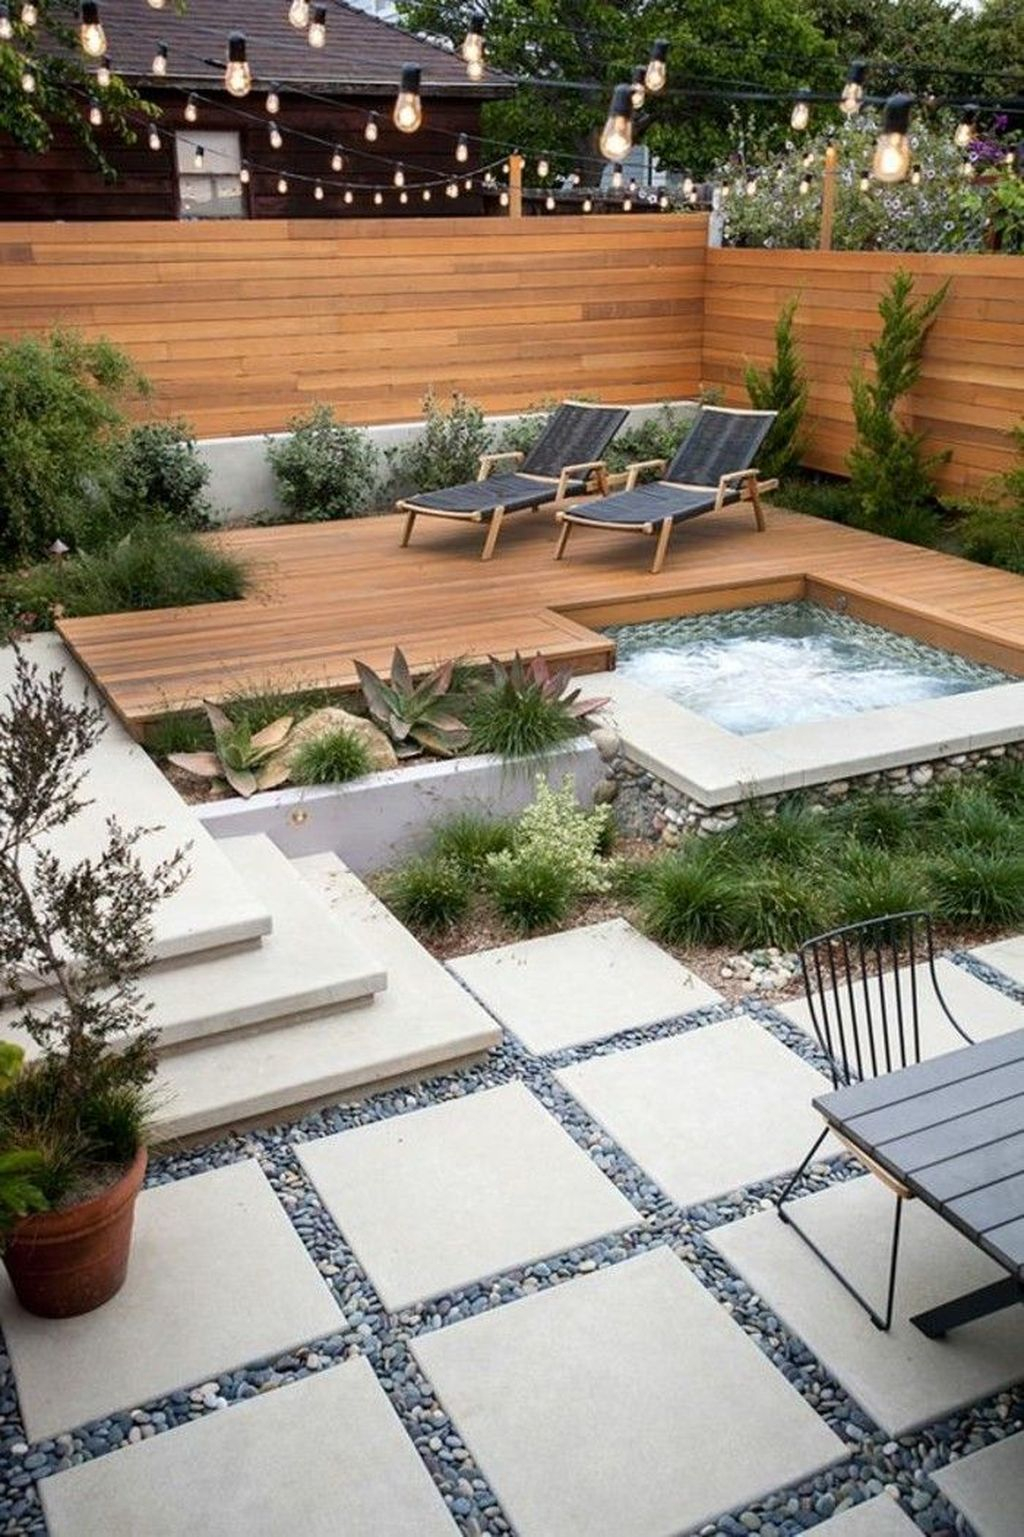 Outstanding Garden Design Ideas With Best Style To Try02